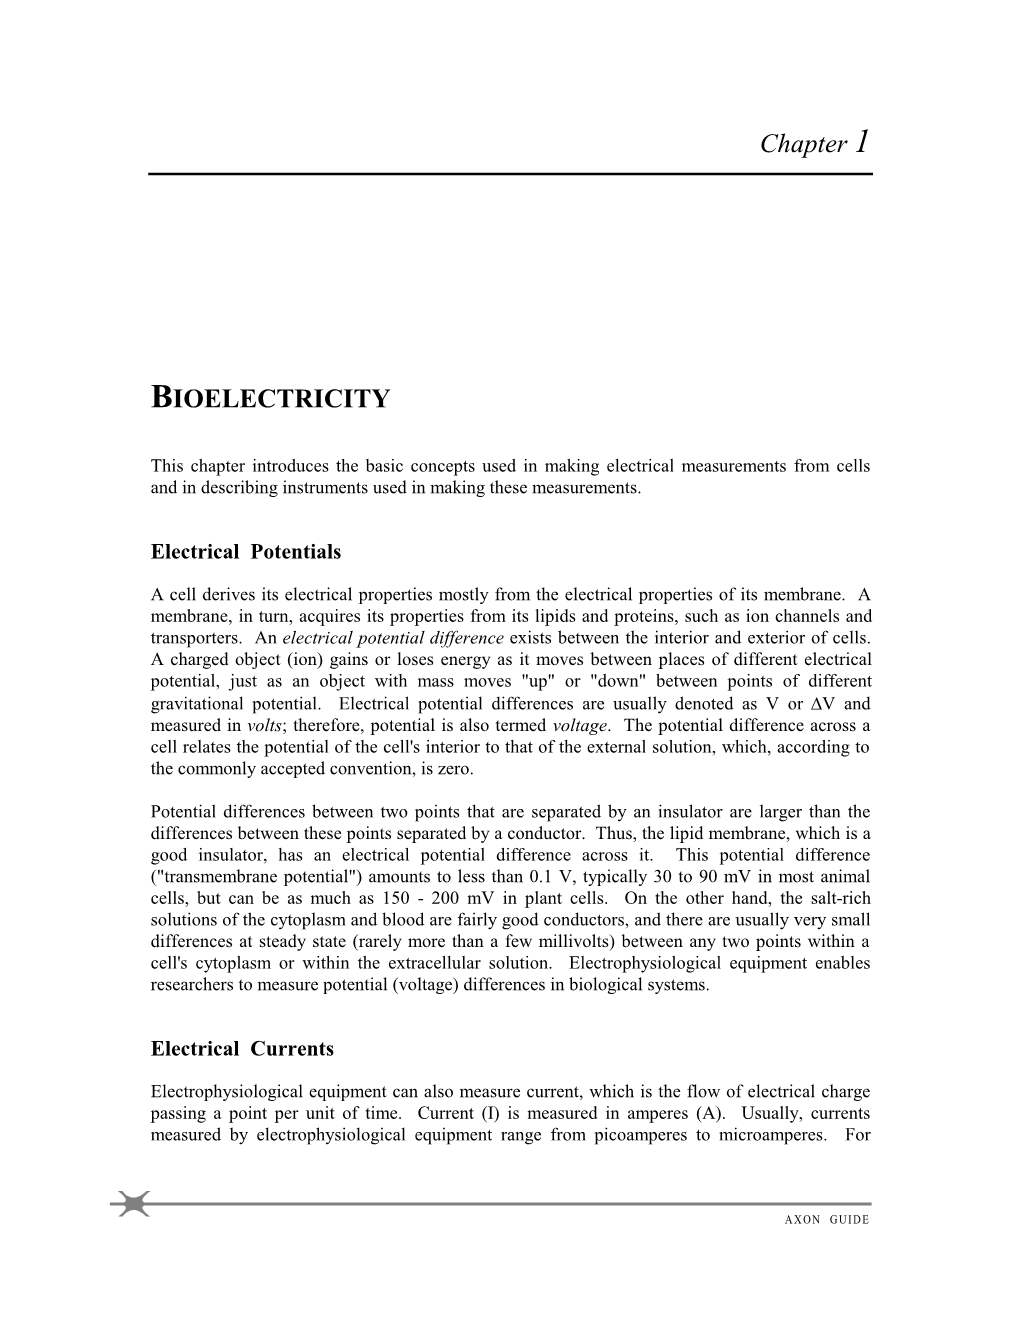 Chapter 1 BIOELECTRICITY